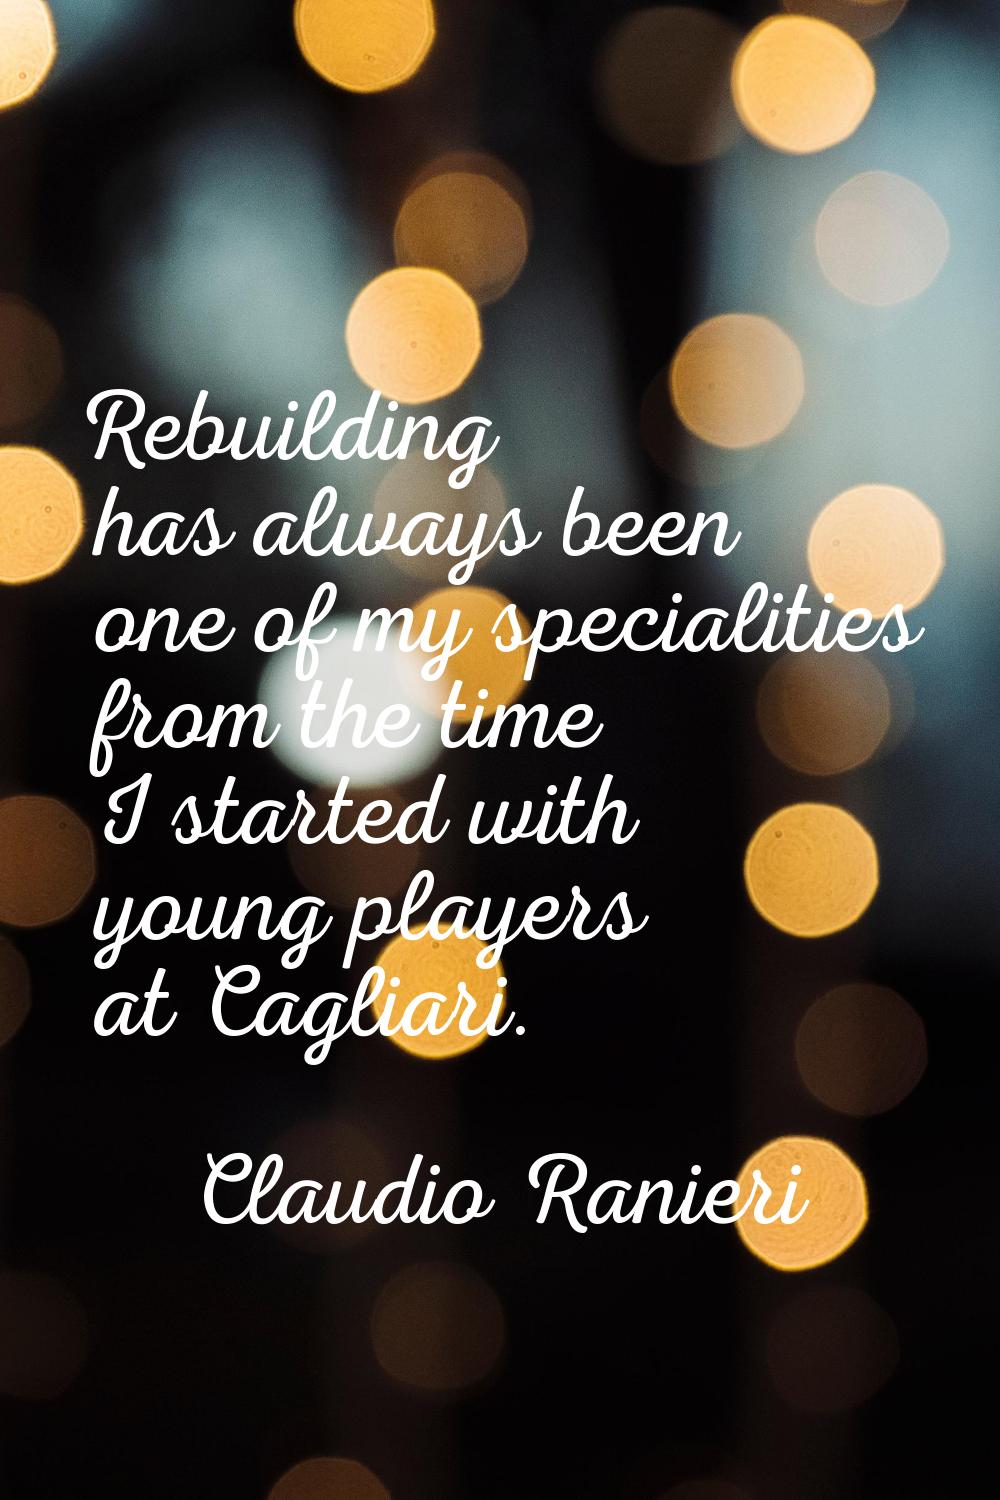 Rebuilding has always been one of my specialities from the time I started with young players at Cag